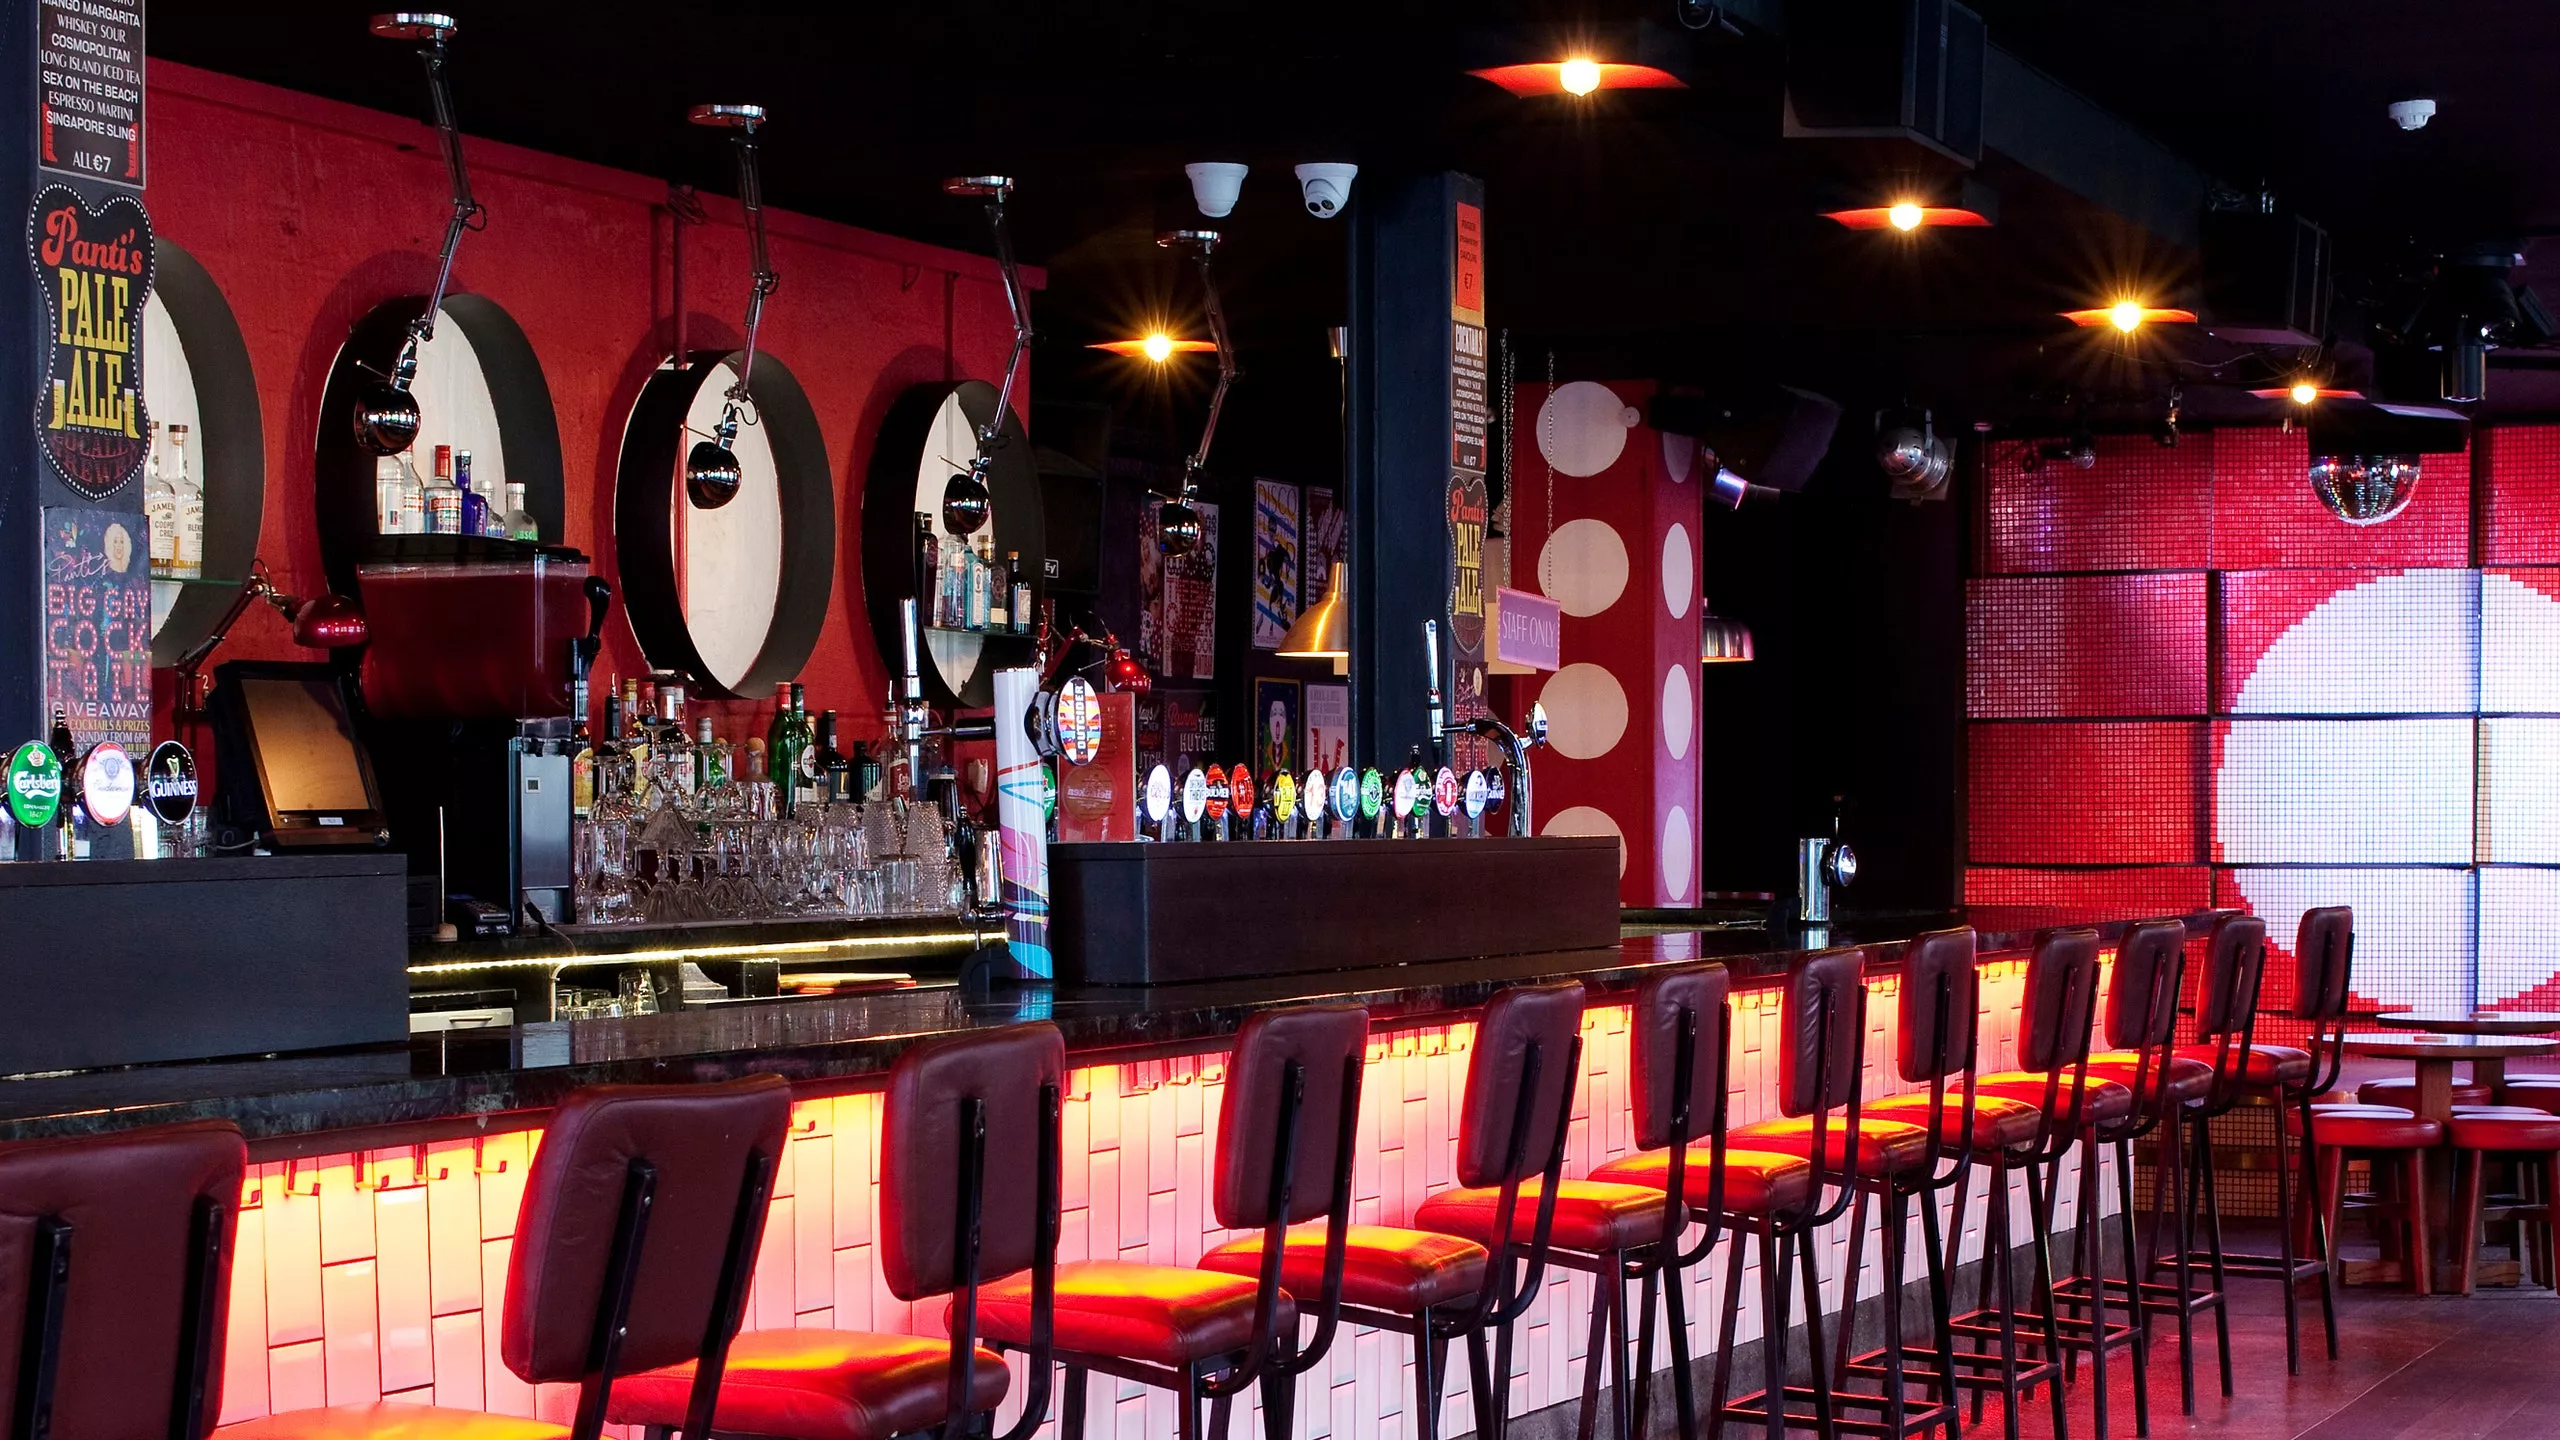 PantiBar in Ireland, Europe | LGBT-Friendly Places,Bars - Rated 3.7